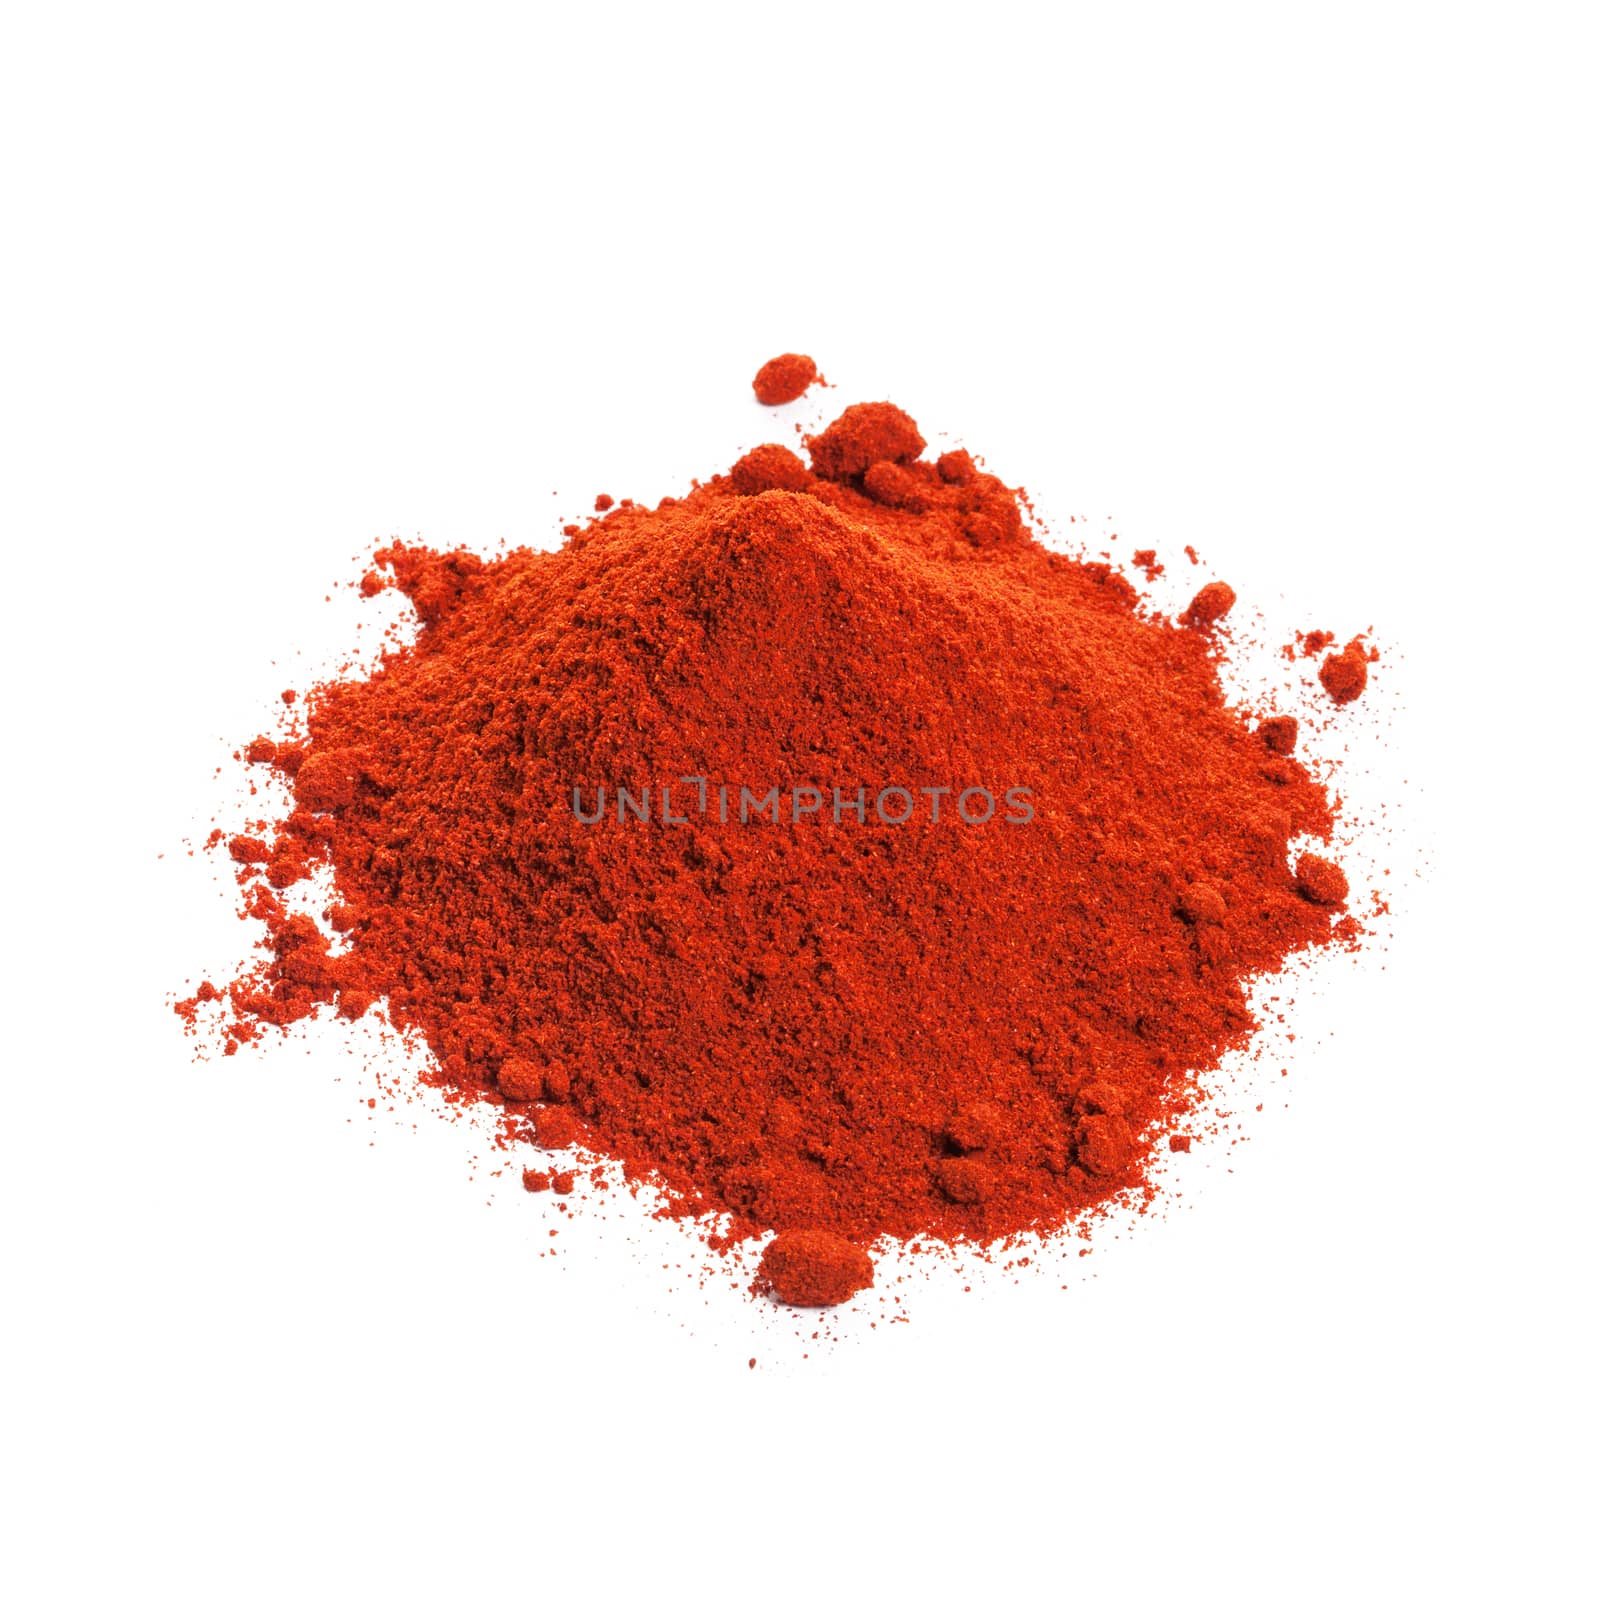 Powdered dried red pepper isolated on white background.